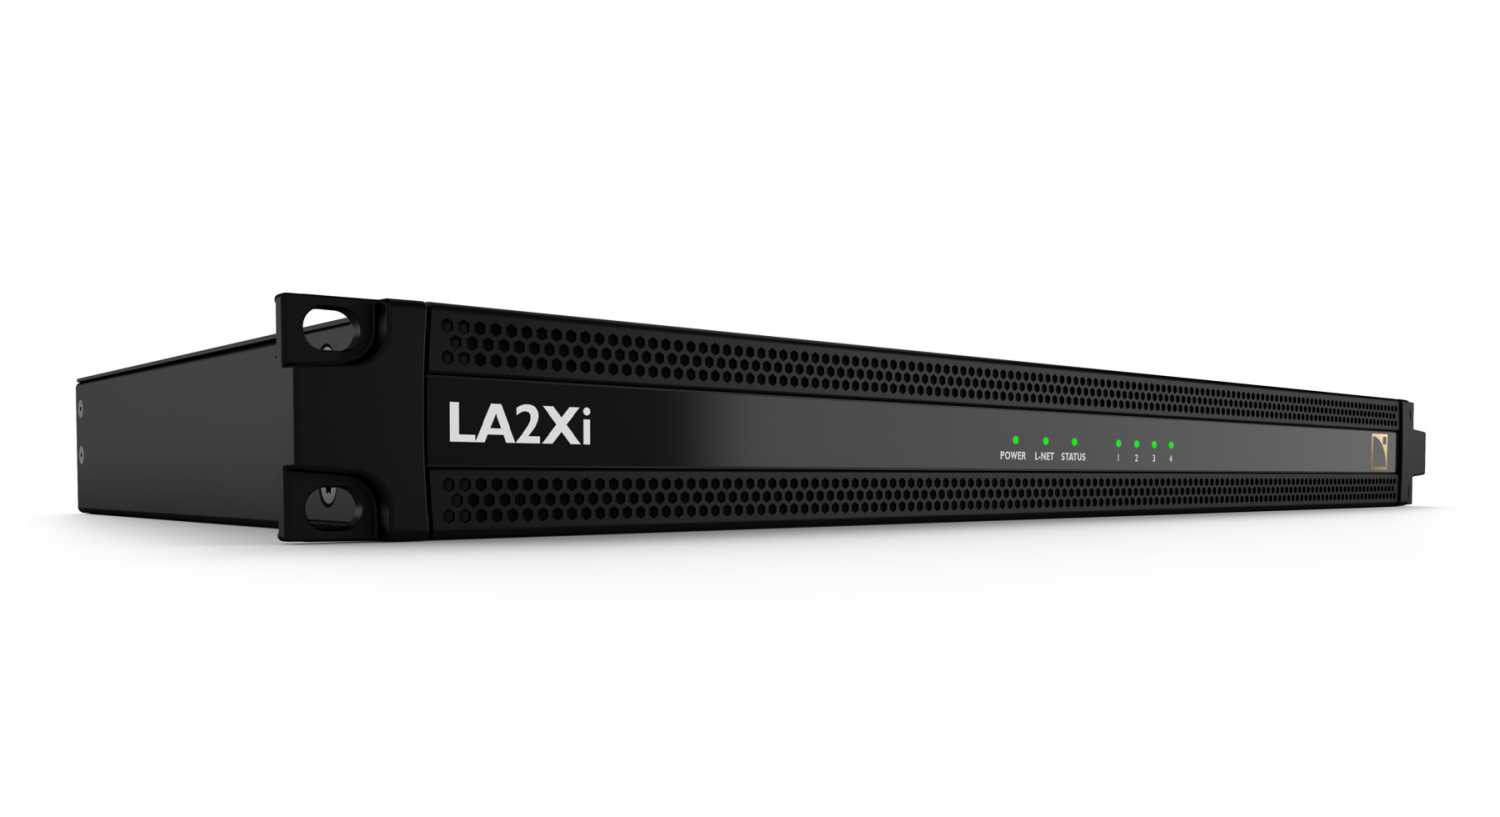 LA2Xi ships in September 2020 and can be seen at ISE